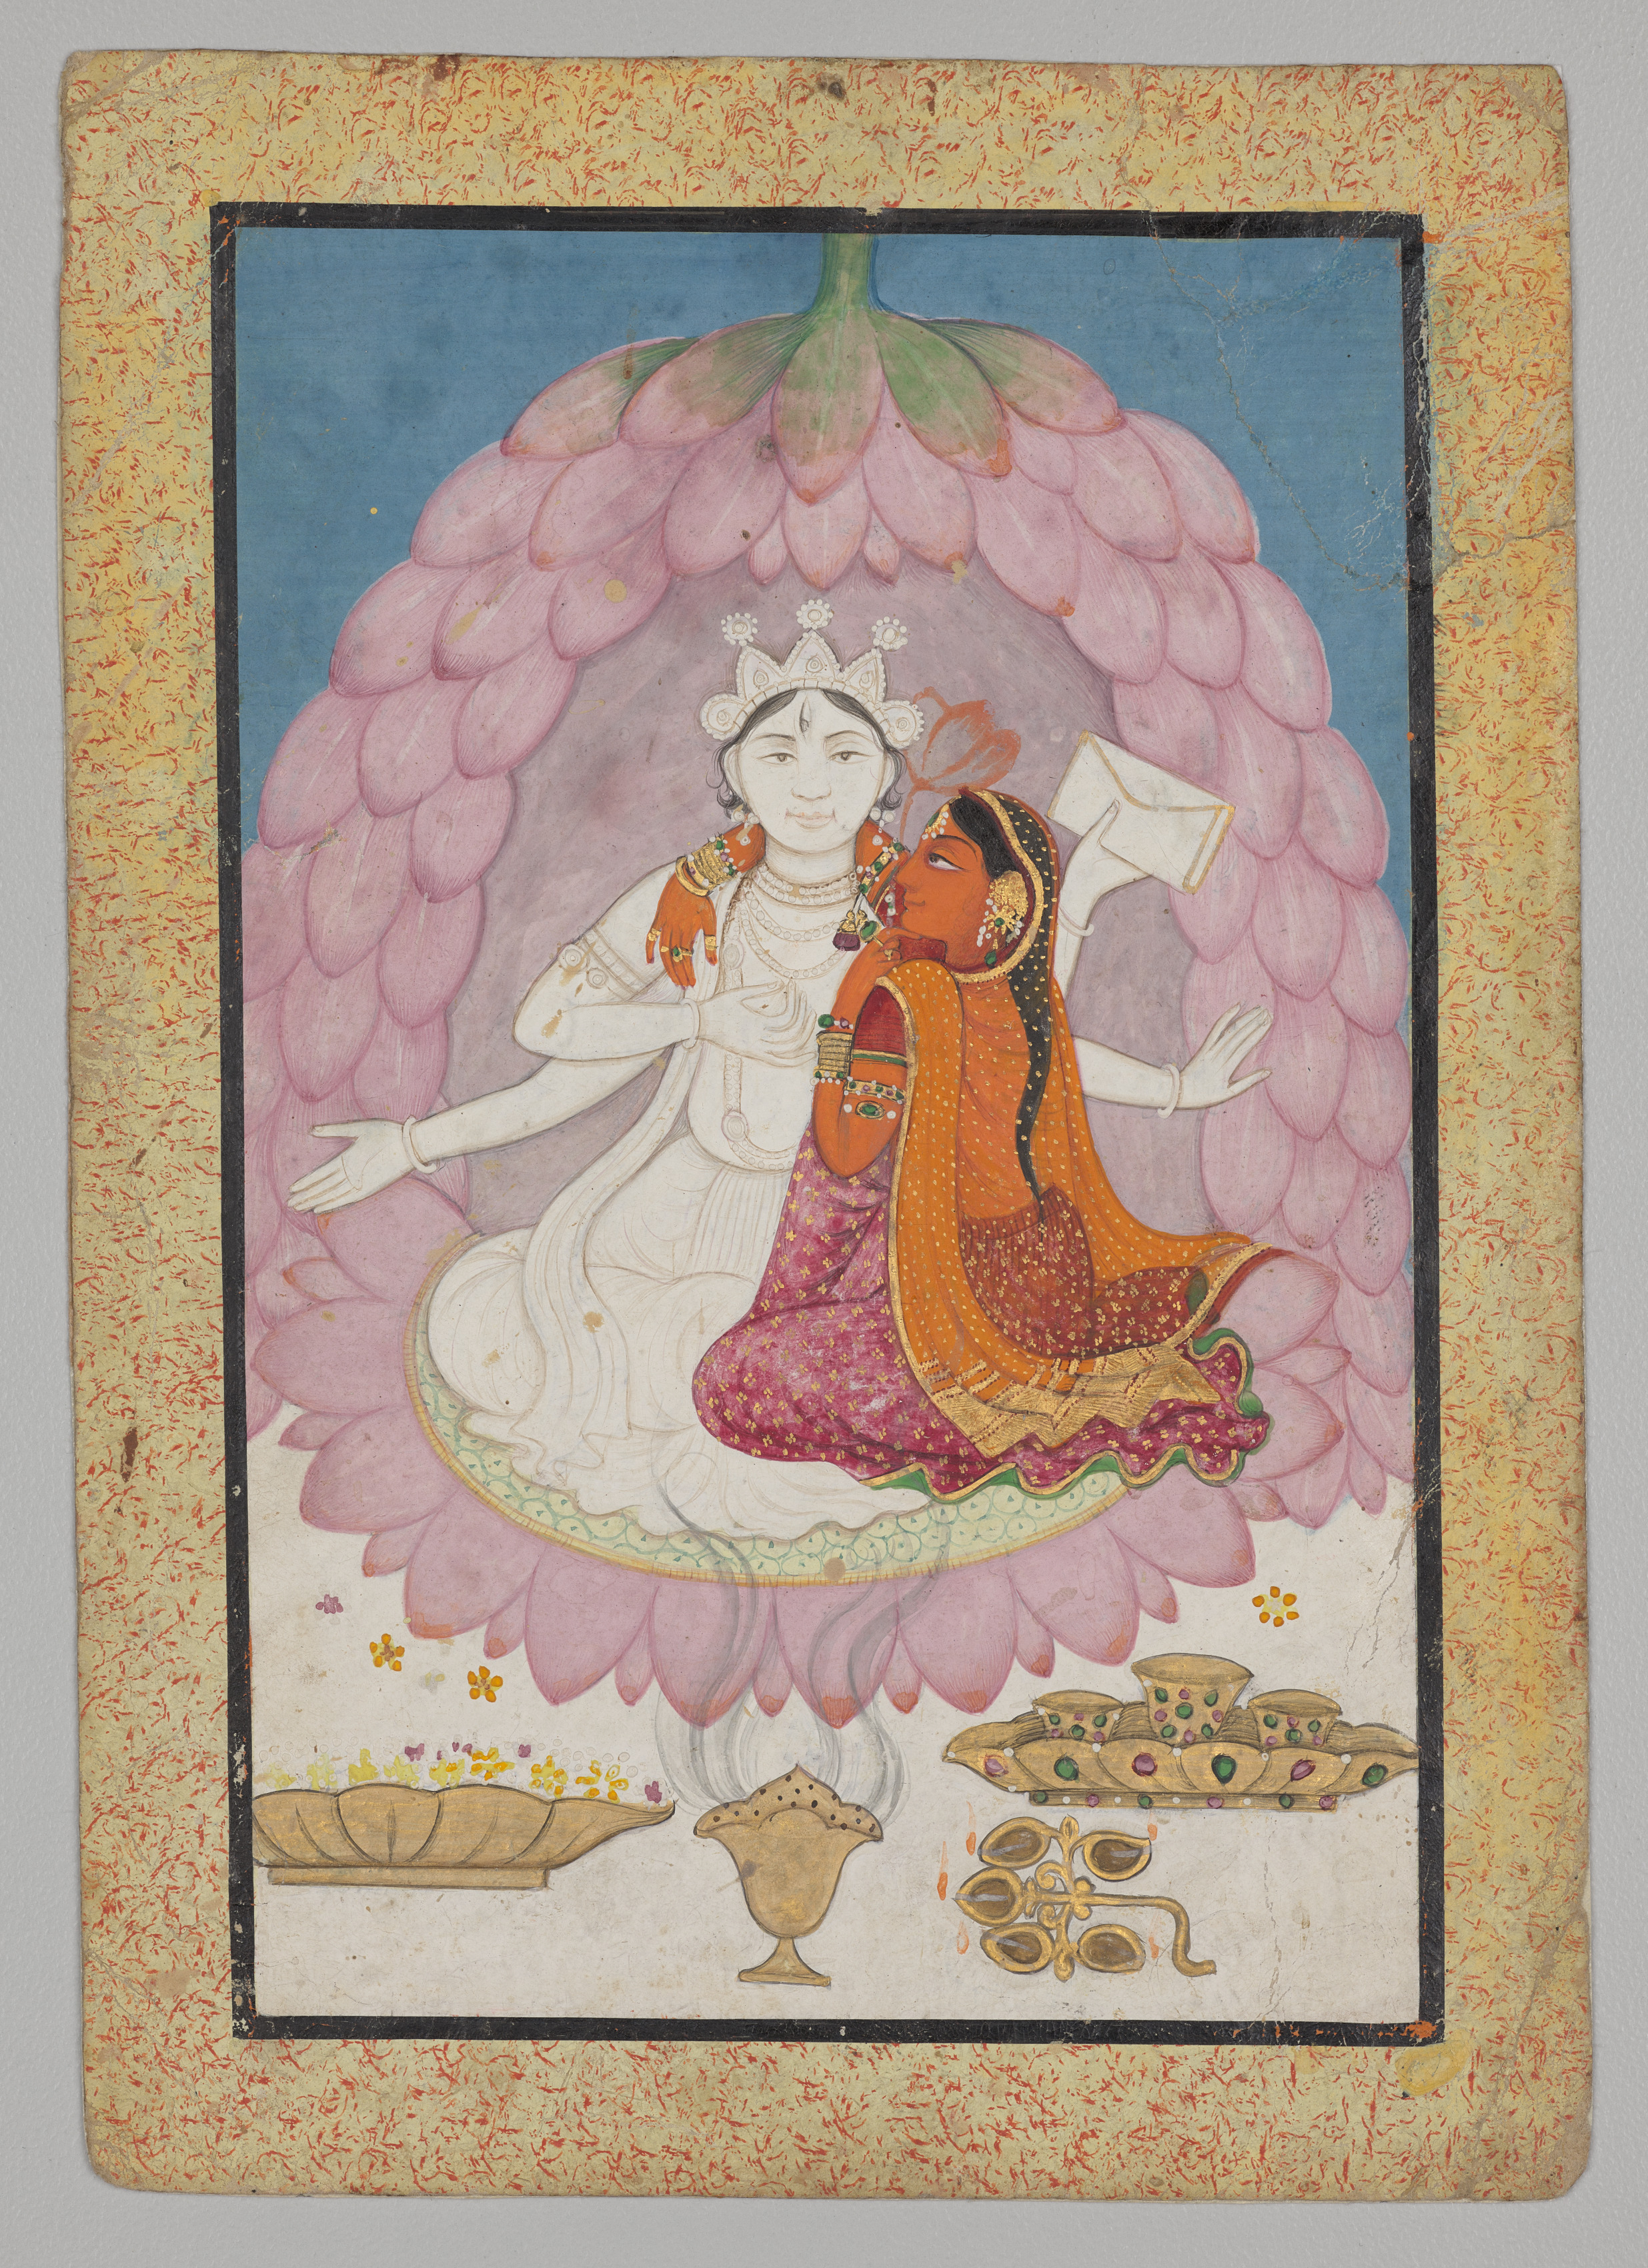 Divine couple seated in a lotus blossom